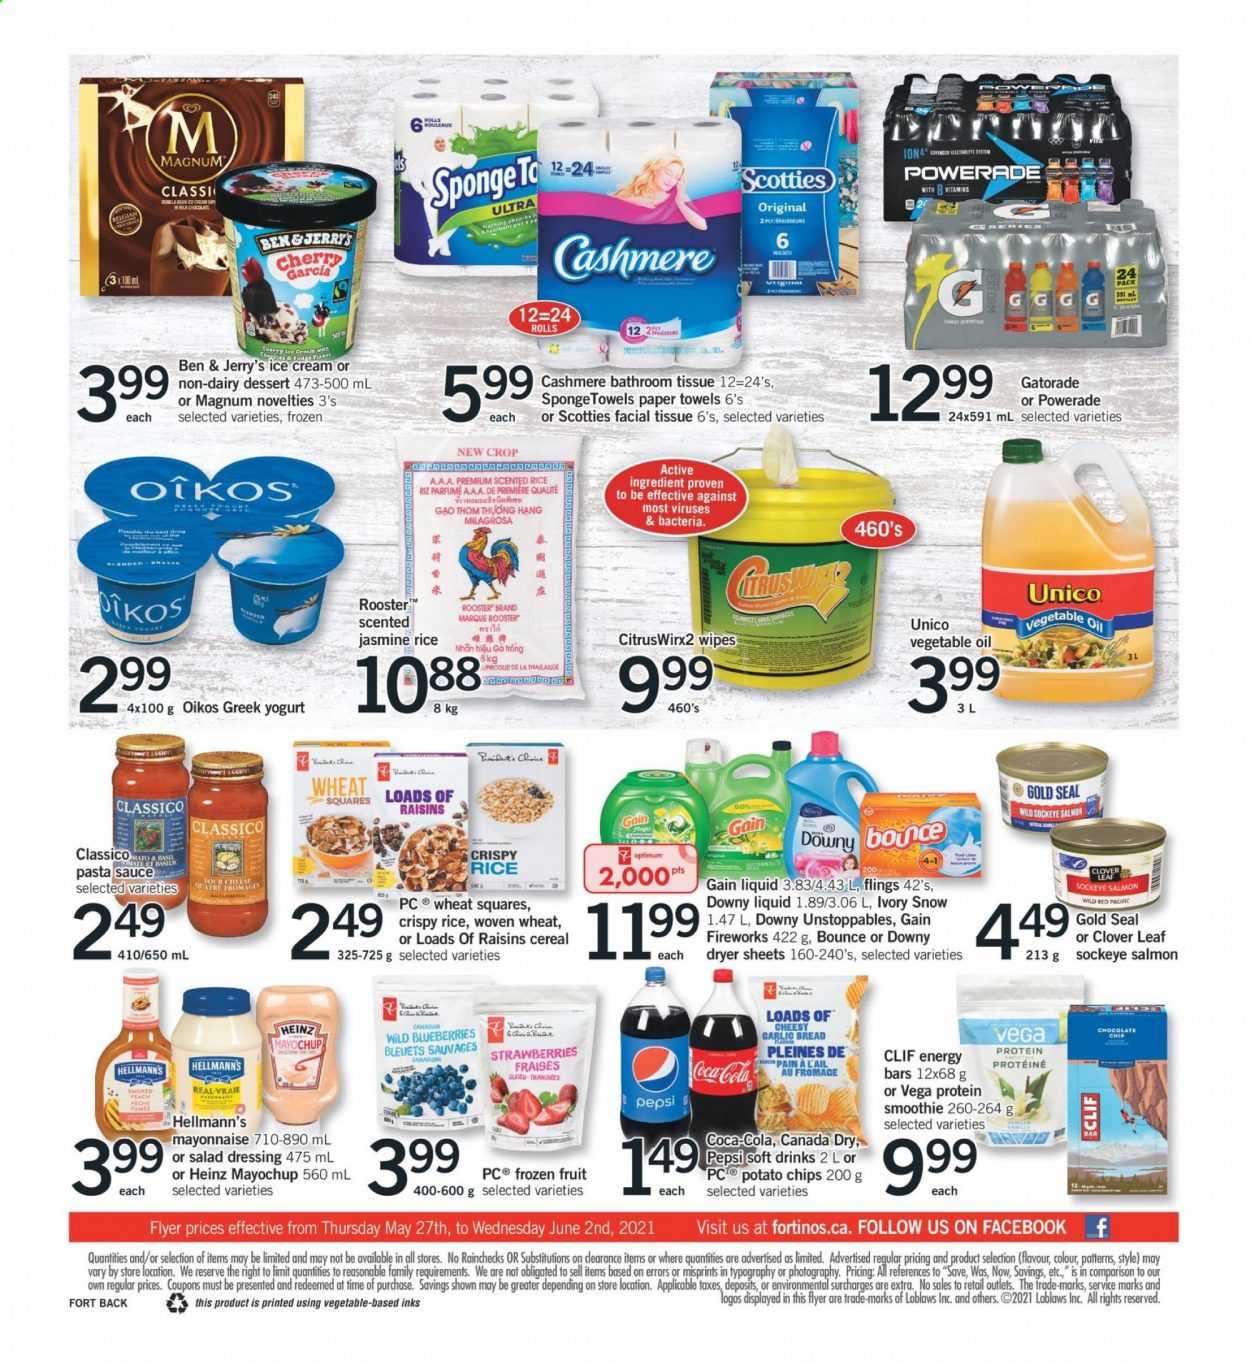 thumbnail - Fortinos Flyer - May 27, 2021 - June 02, 2021 - Sales products - bread, blueberries, strawberries, cherries, salmon, pasta sauce, sauce, greek yoghurt, yoghurt, Clover, Oikos, mayonnaise, Hellmann’s, Magnum, ice cream, Ben & Jerry's, potato chips, Heinz, cereals, energy bar, jasmine rice, salad dressing, dressing, Classico, vegetable oil, oil, dried fruit, Canada Dry, Coca-Cola, Powerade, Pepsi, soft drink, Gatorade, smoothie, wipes, bath tissue, kitchen towels, paper towels, Gain, dryer sheets, Gain Fireworks, Downy Laundry, sponge, PREMIERE, Optimum, raisins. Page 2.